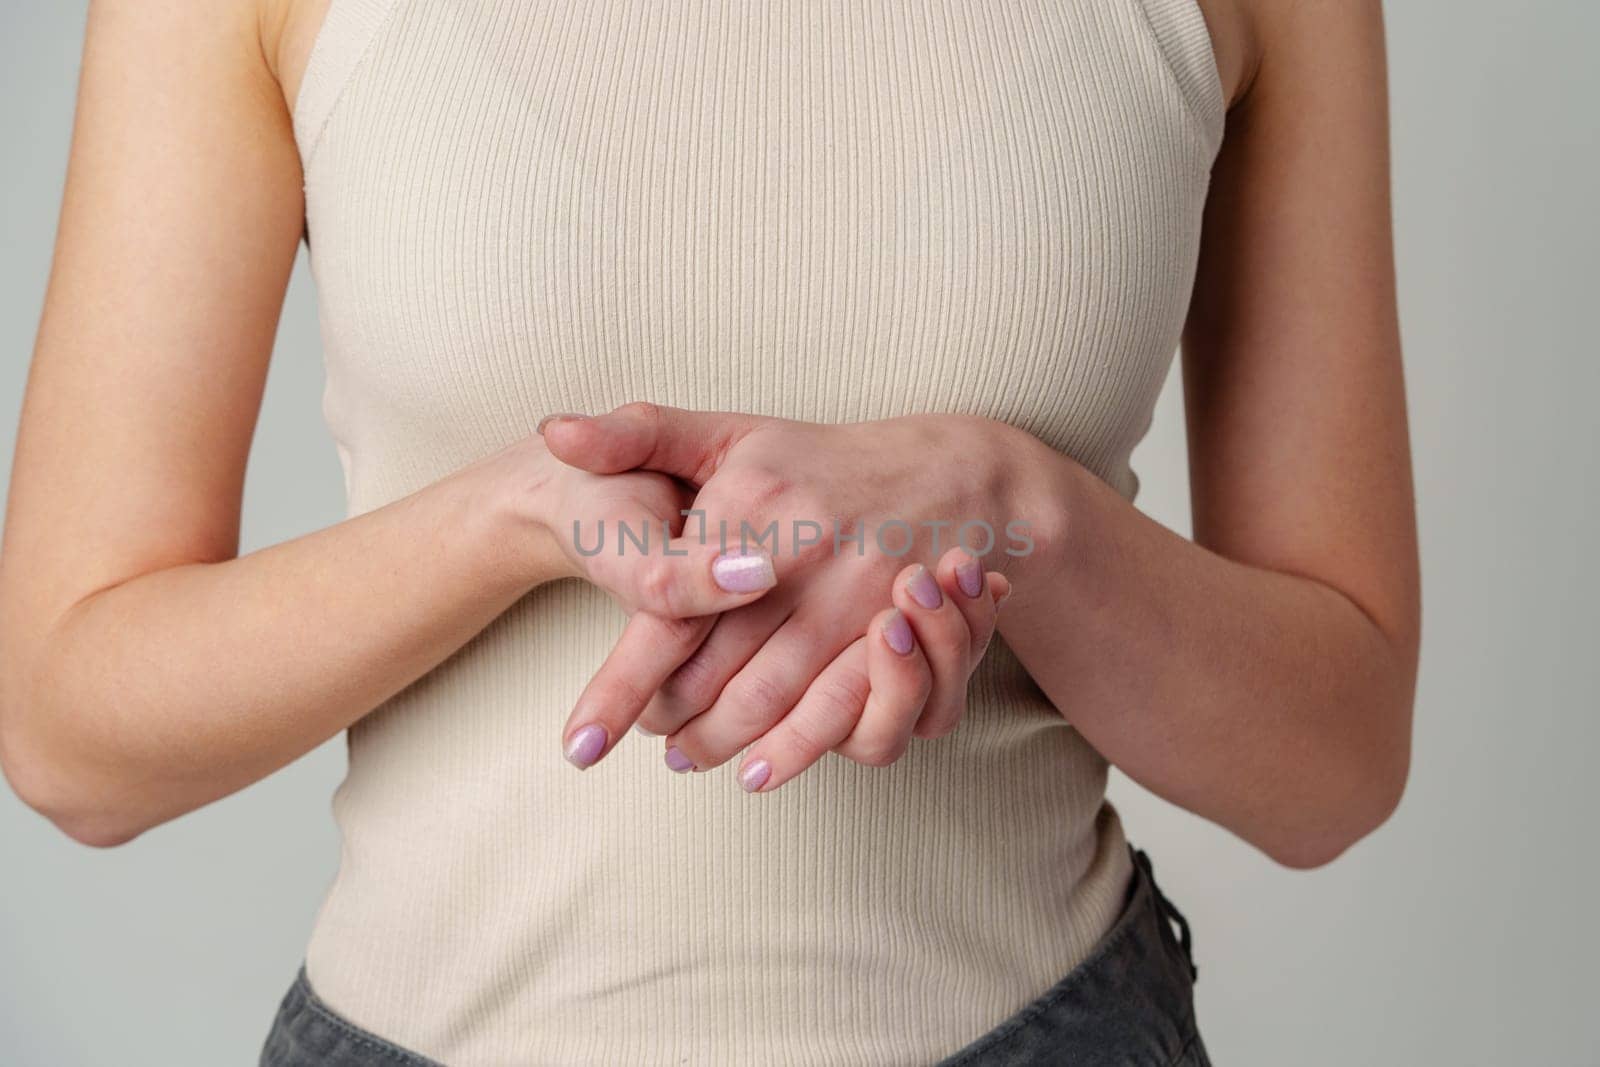 Female body in beige top on gray background close up